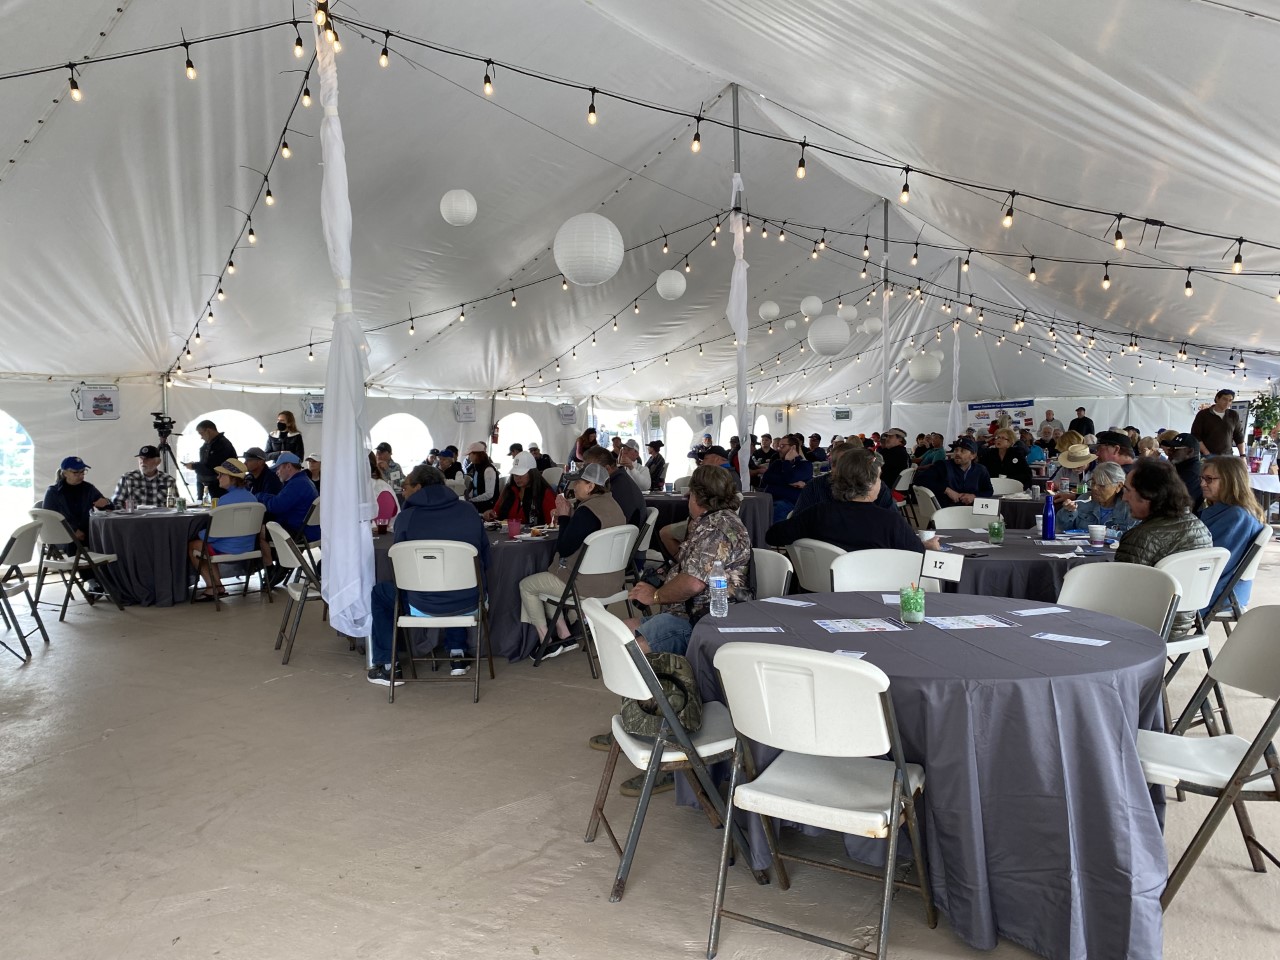 A picture from inside the event tent, with groups of people around circular tables